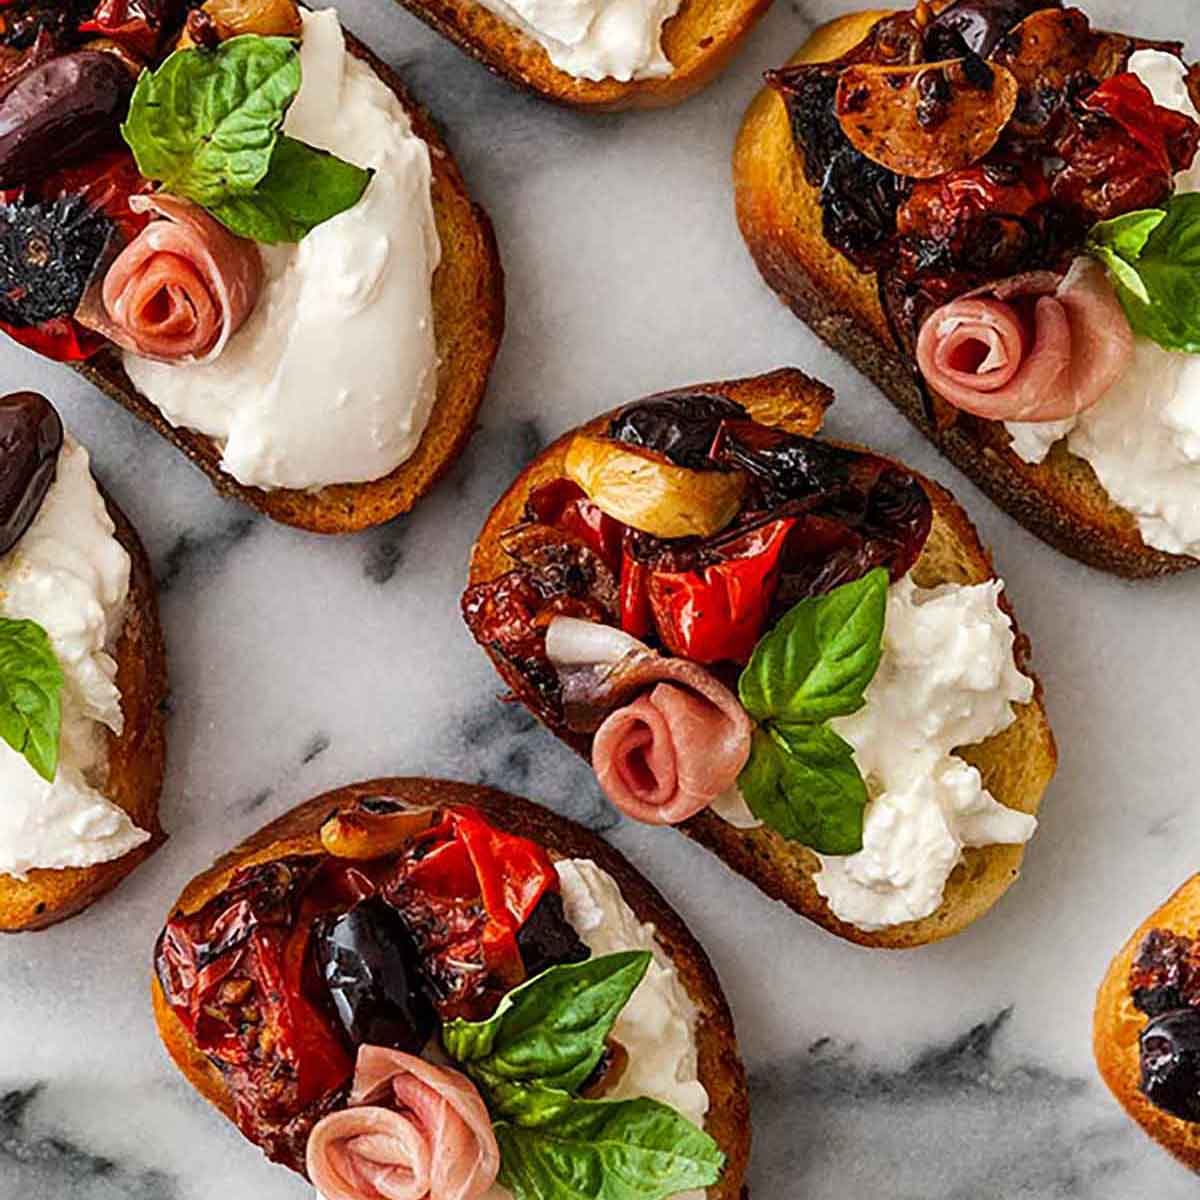 7 bruschetta on a marble slate with tomato, burrata and a prosciutto rose, garnished with basil.